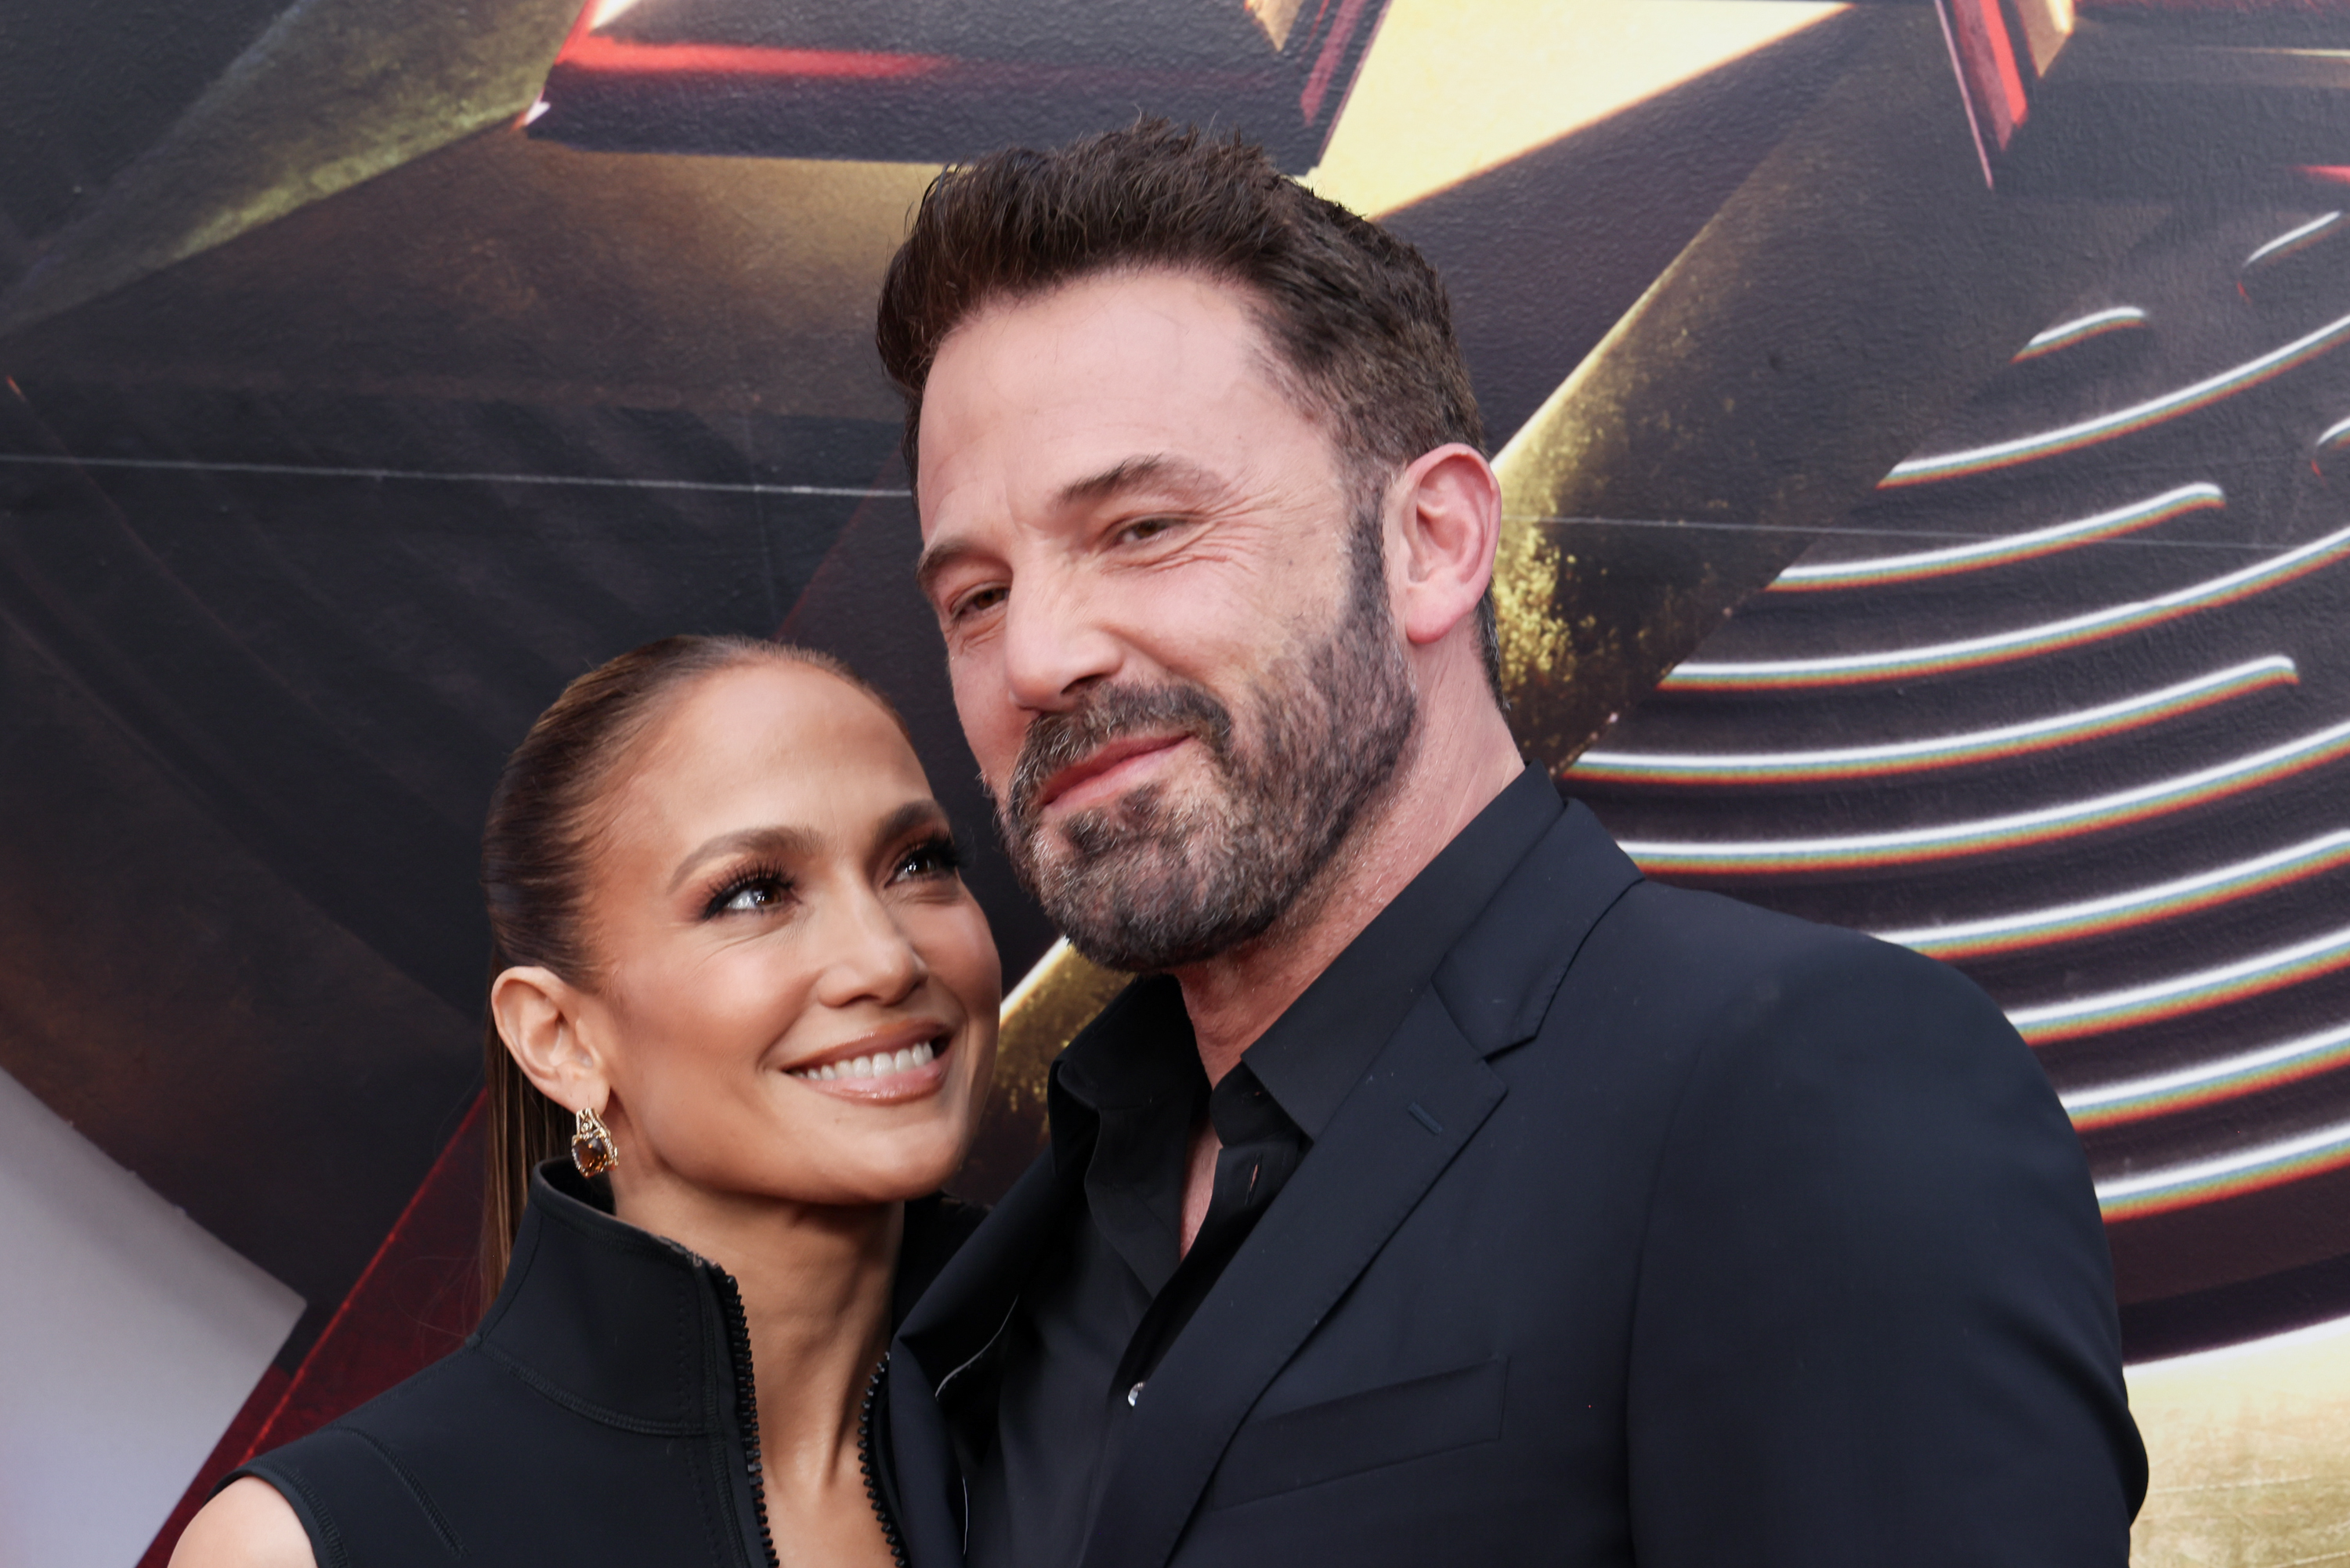 Jennifer Lopez and Ben Affleck at the premiere of "The Flash" on June 12, 2023 in Hollywood, California | Source: Getty Images